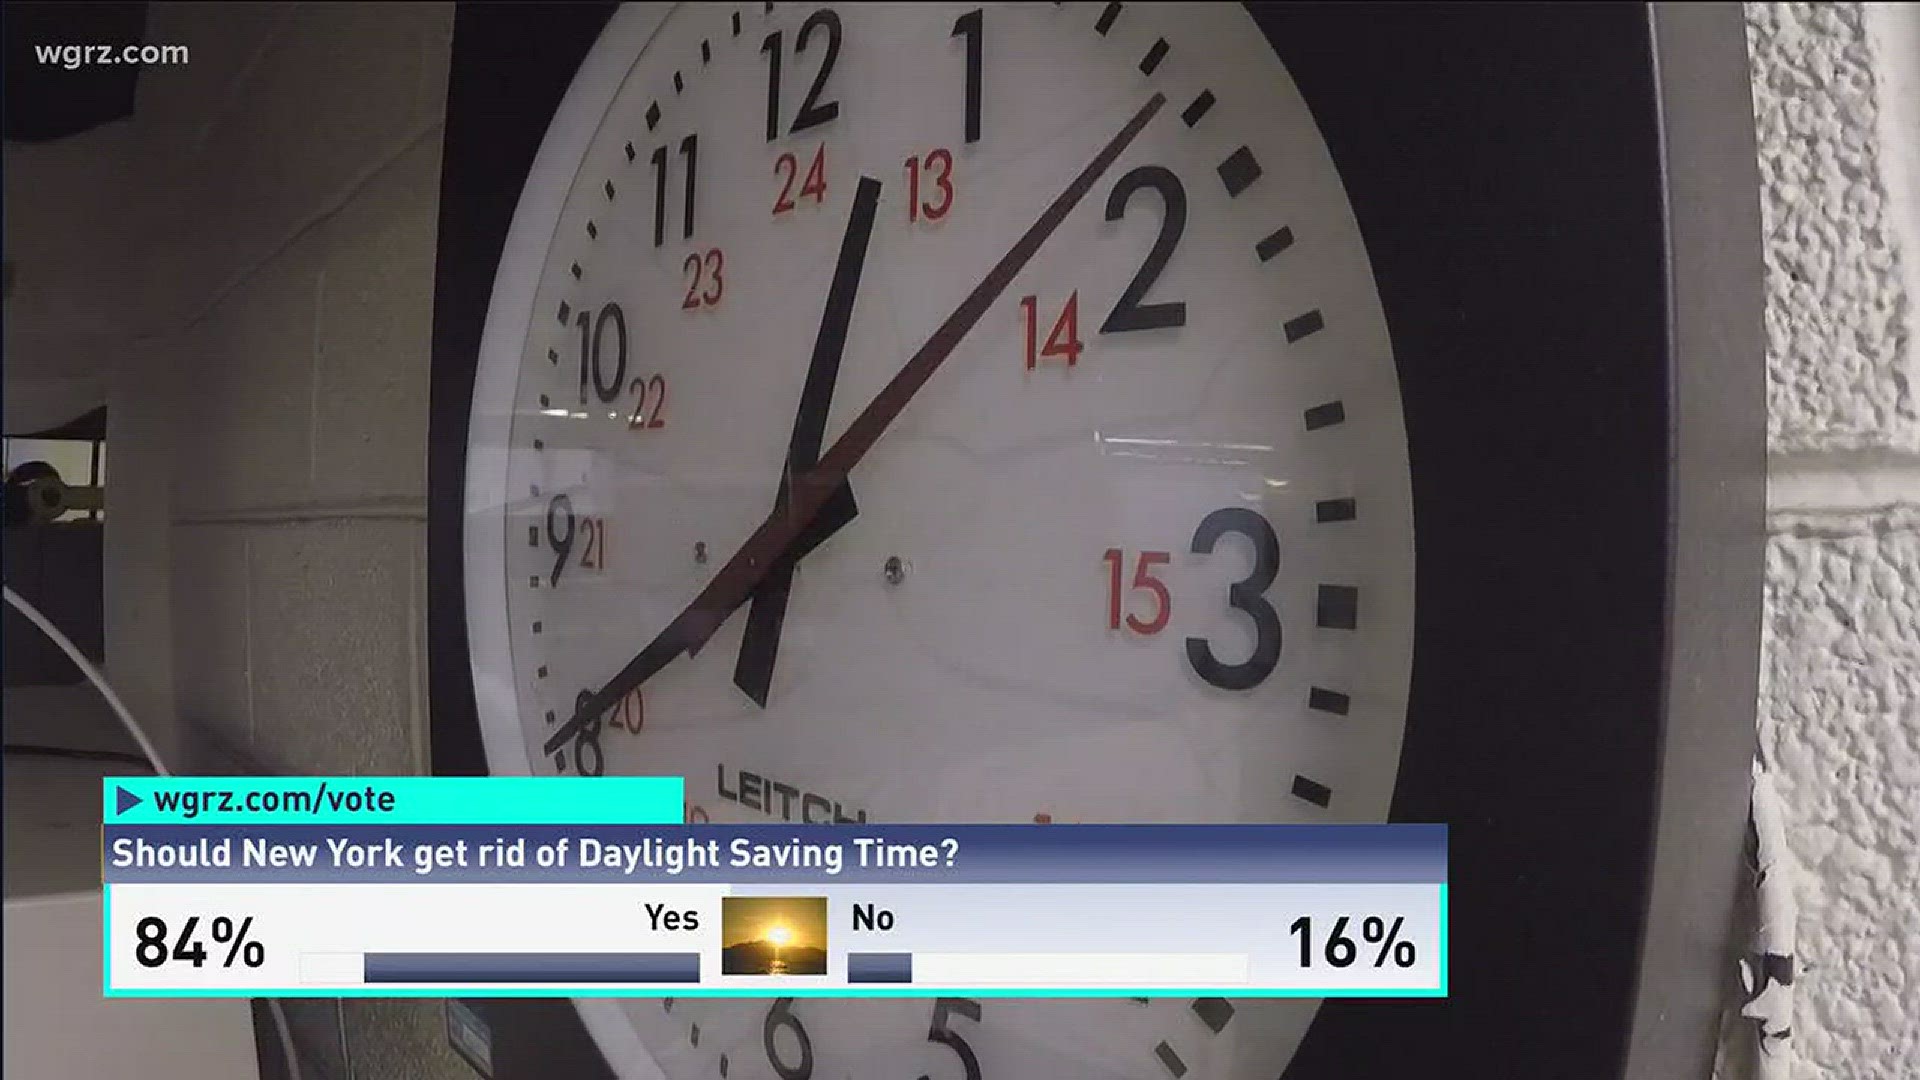 Should New York Get Rid of Daylight Saving Time?